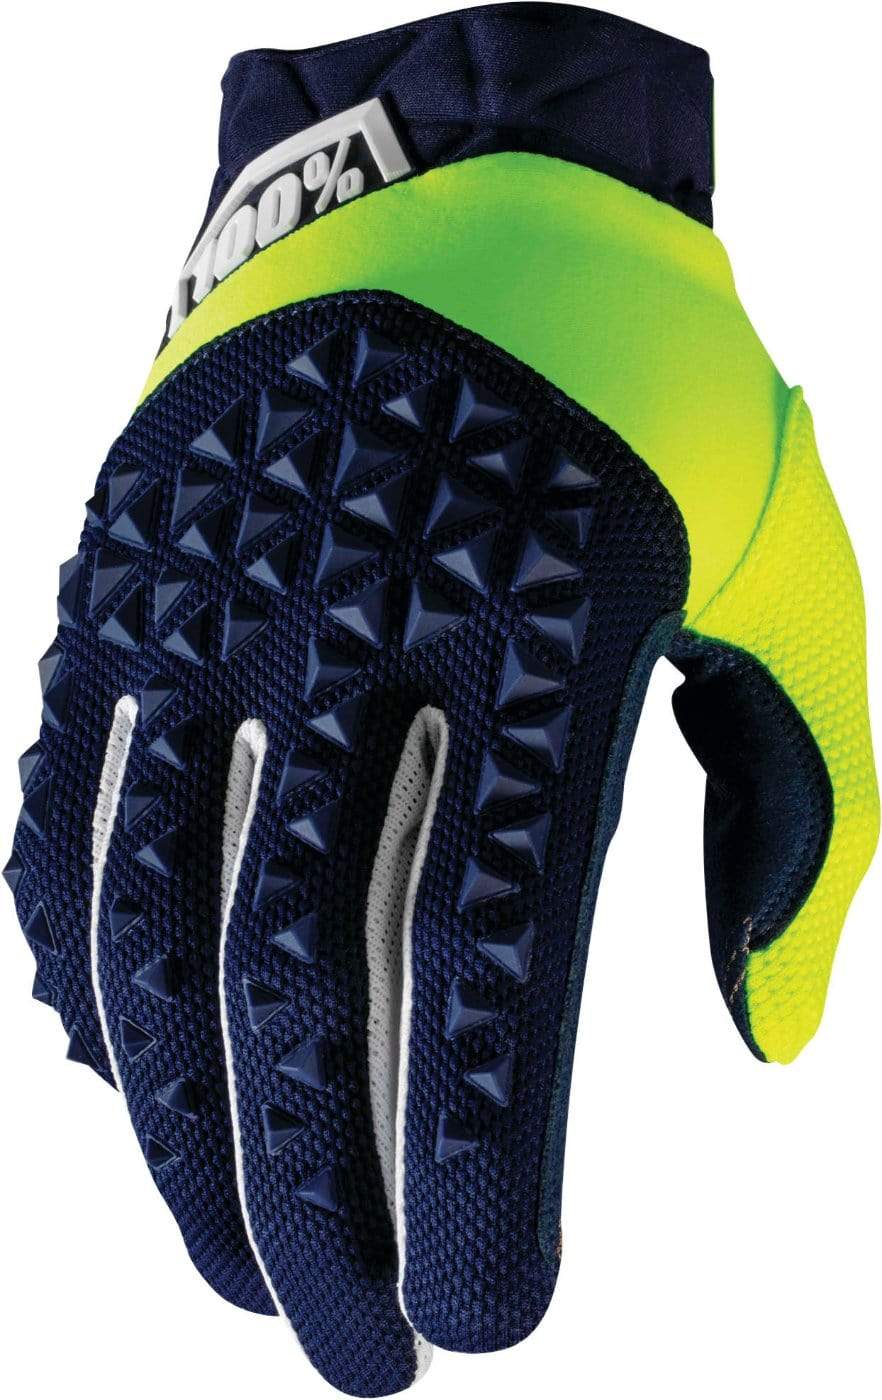 100% Apparel 100% Men's Airmatic Gloves Navy/Fluorescent Yellow